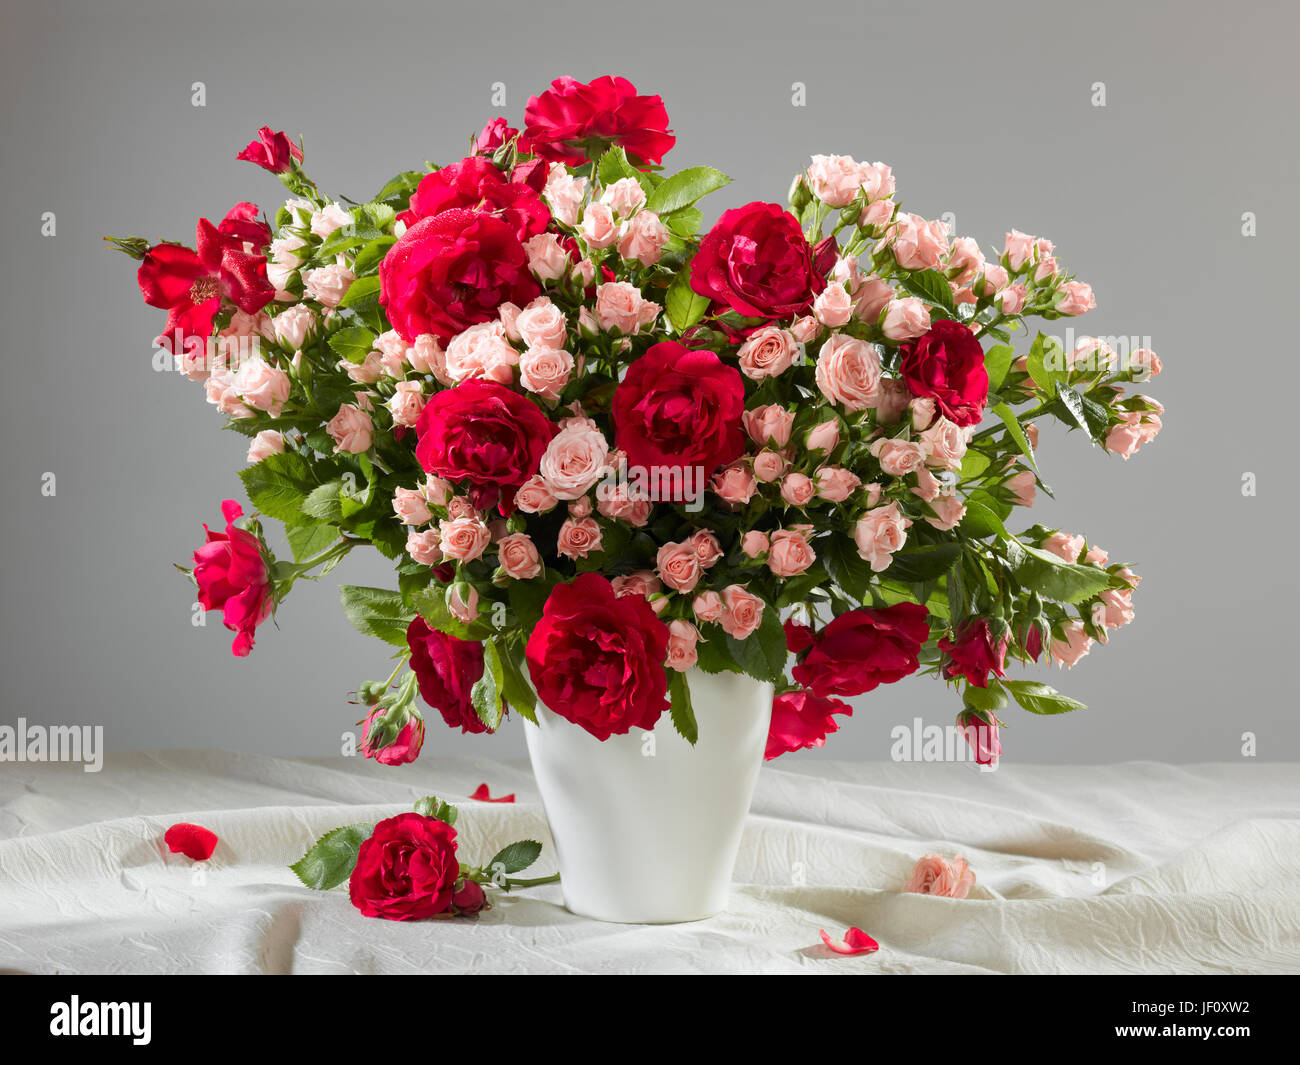 Bouquet of flowers. Roses, carnations. Stock Photo